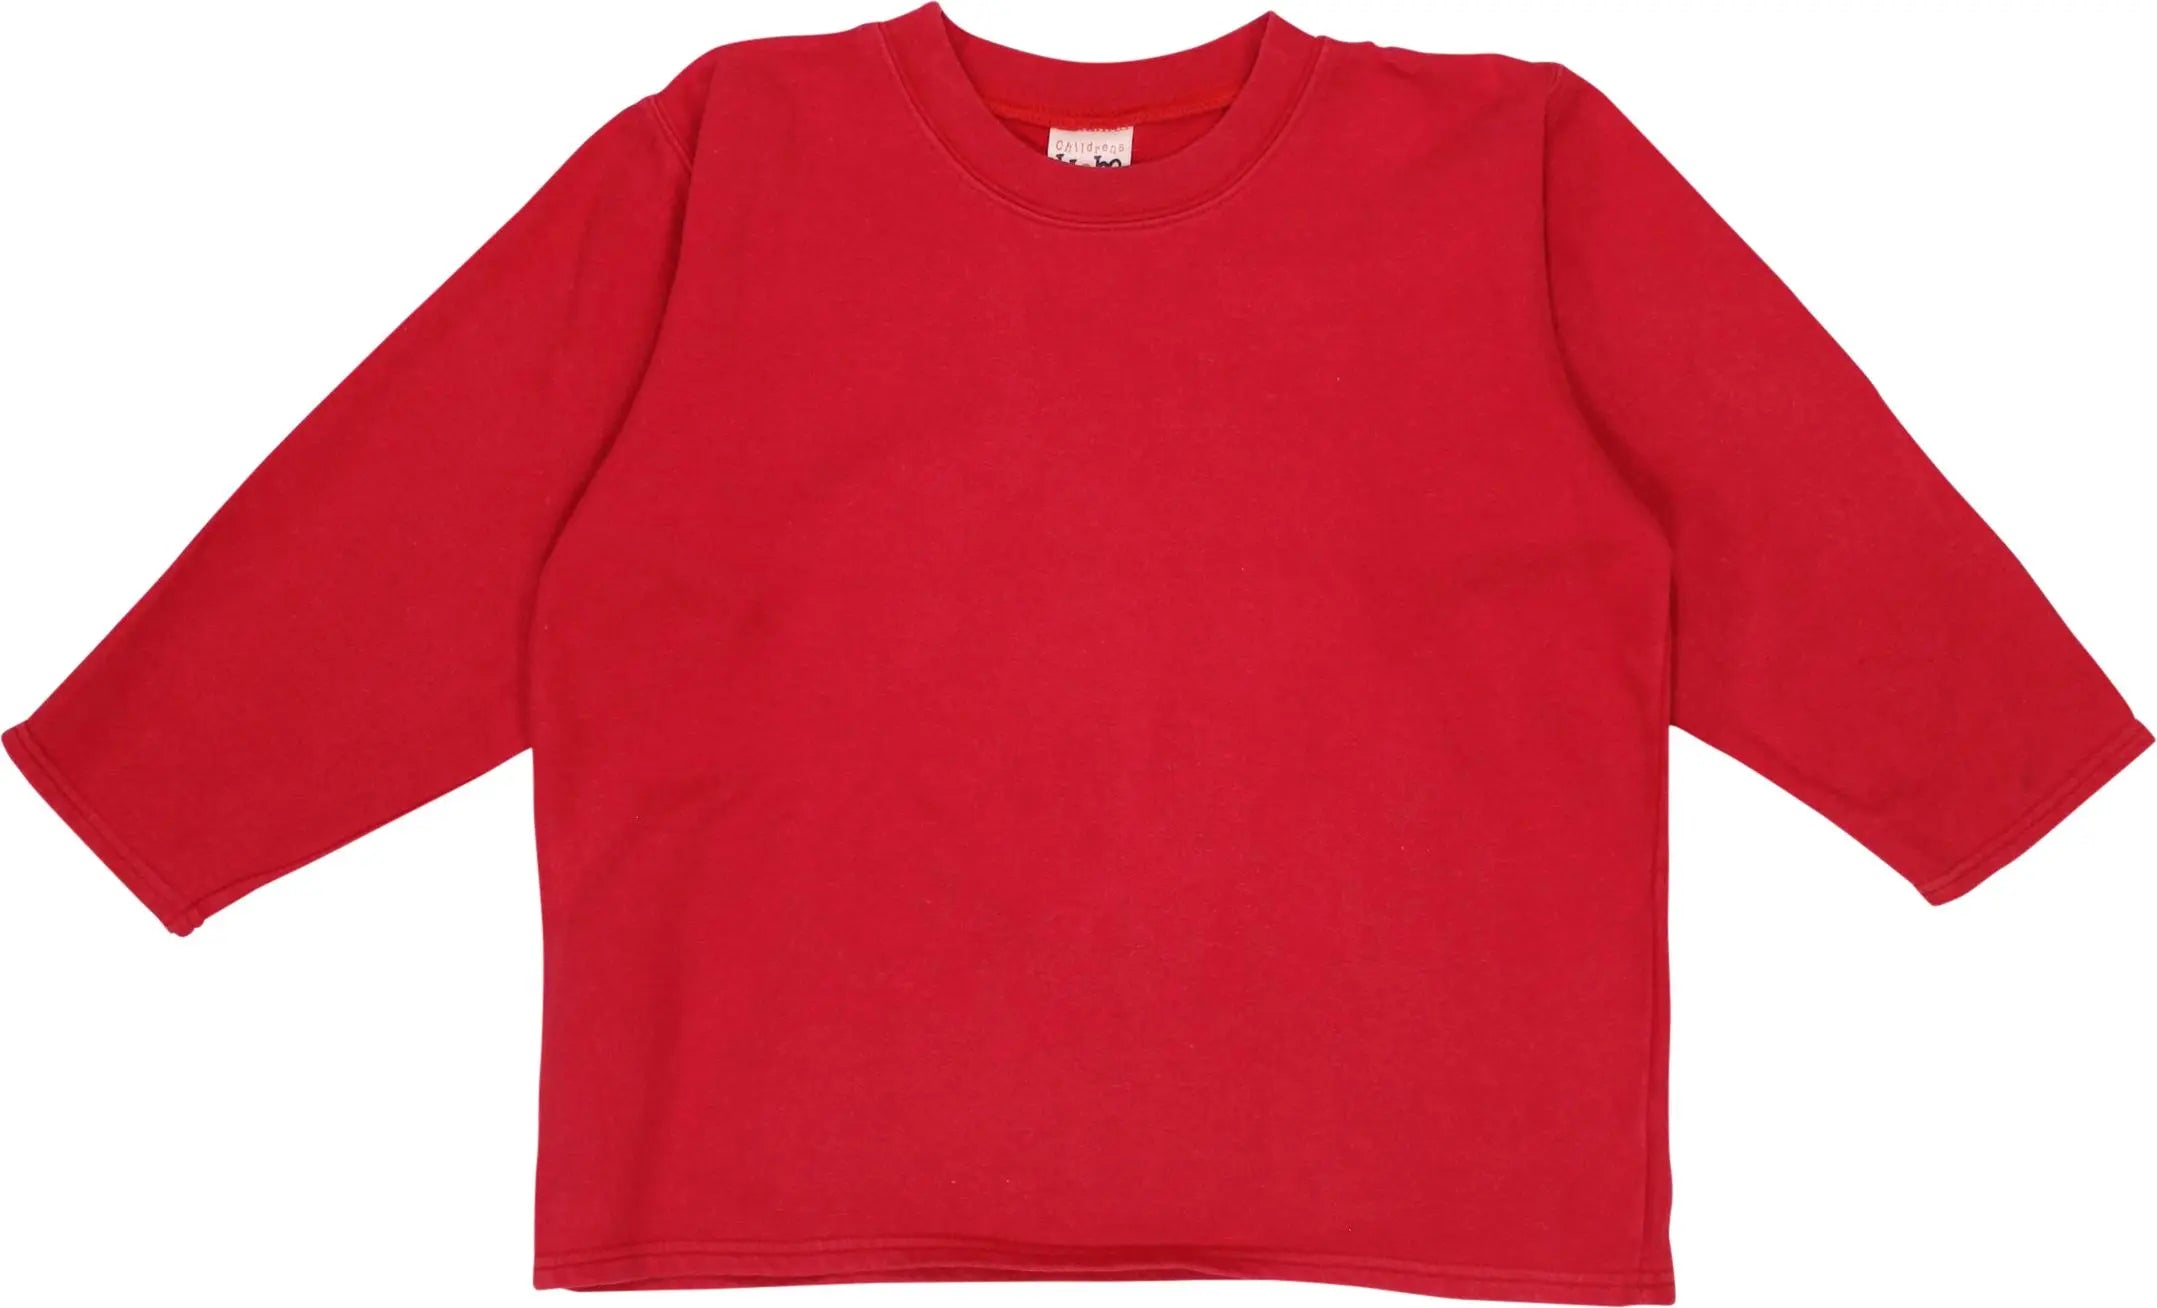 H&M - Red Sweatshirt by H&M- ThriftTale.com - Vintage and second handclothing